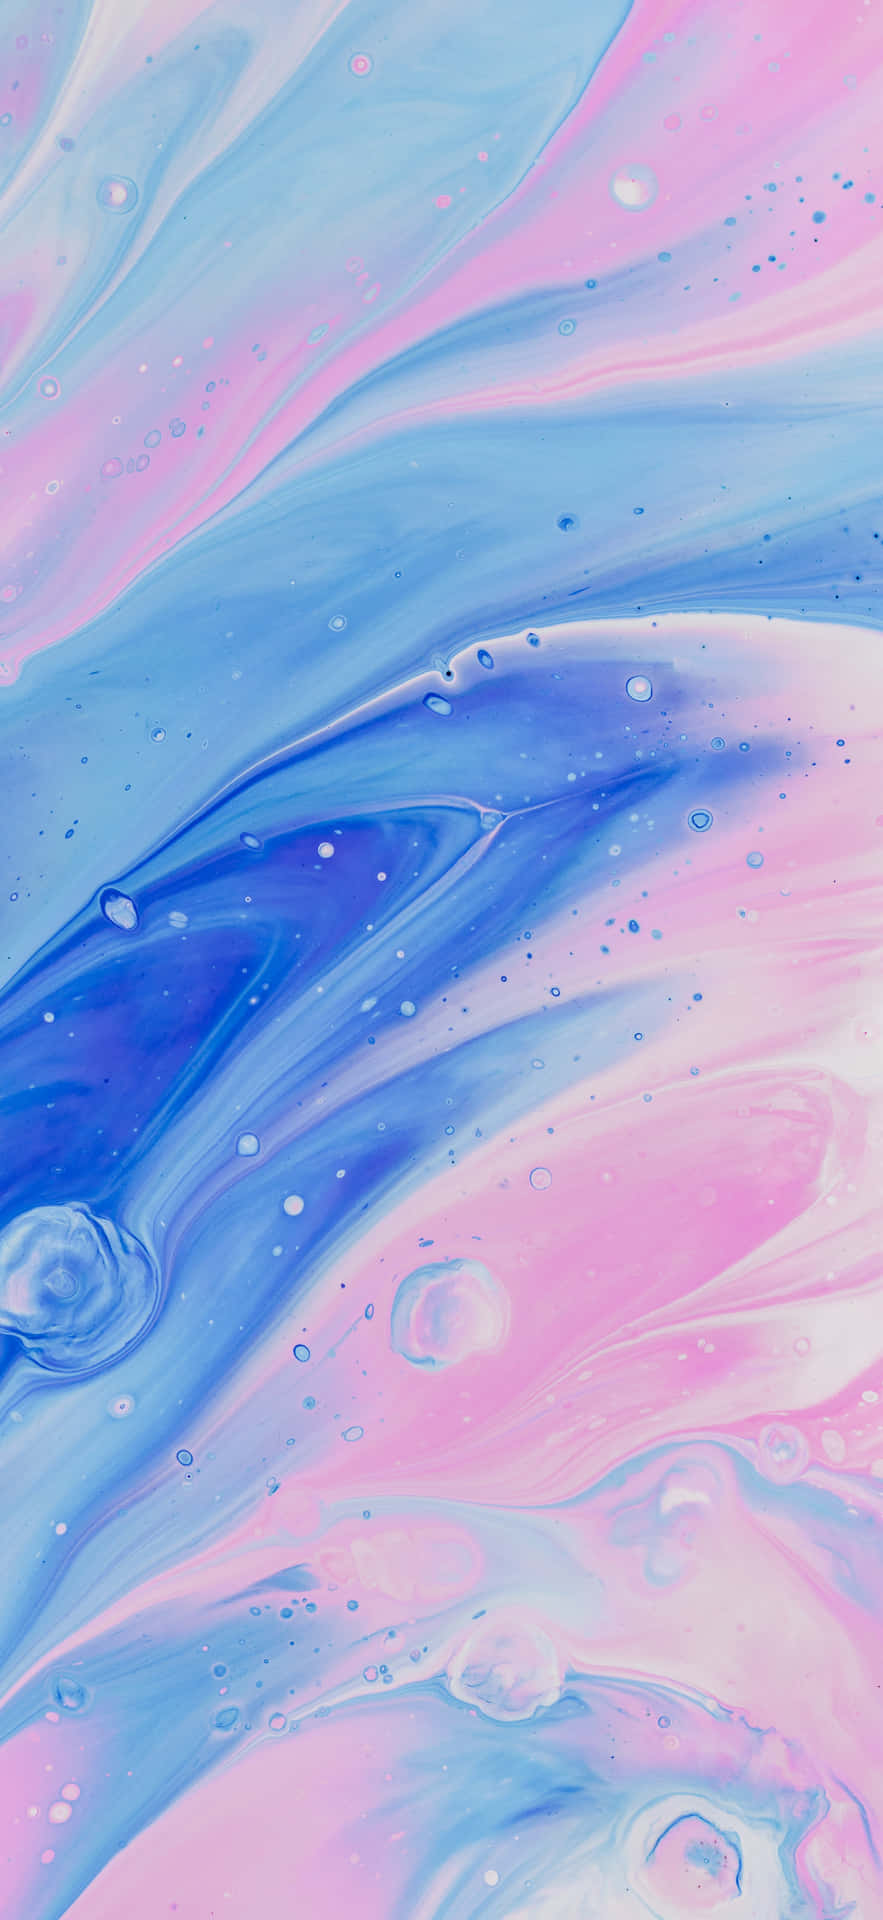 IOS iPhone X Marble Background in Pastel Blue-Pink